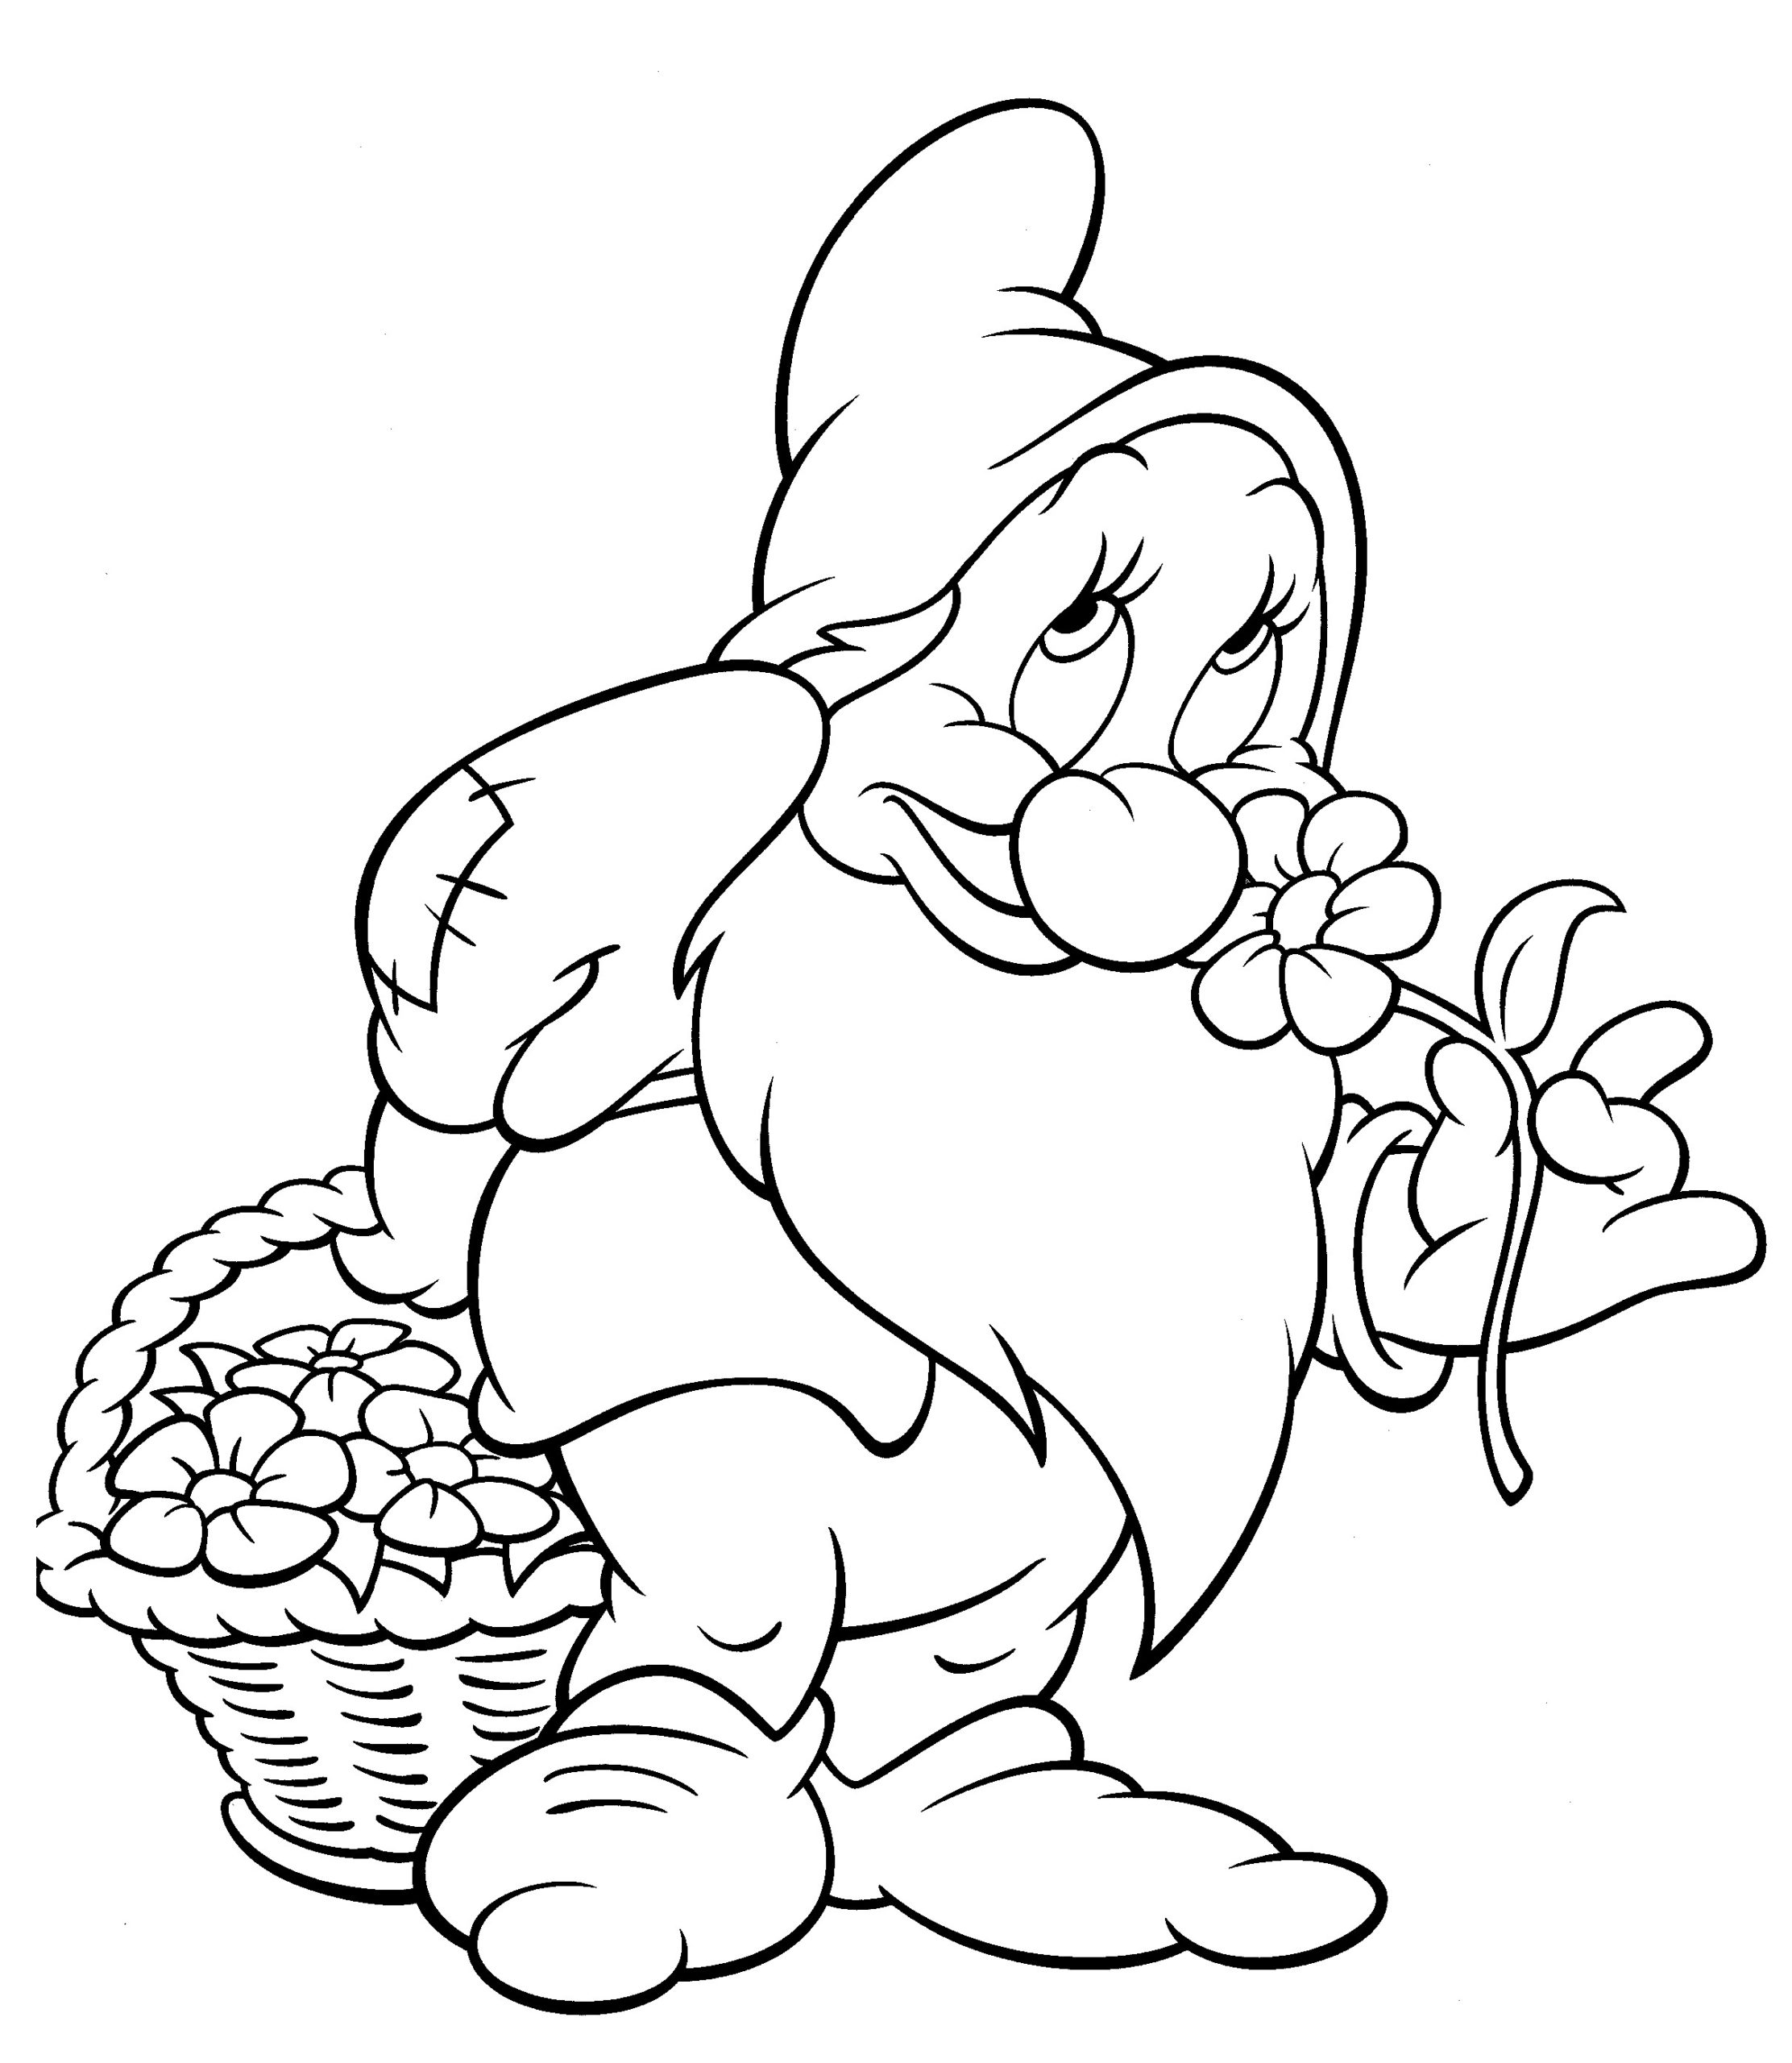 Disney Coloring Pages Bashful The Disney Nerds Podcast